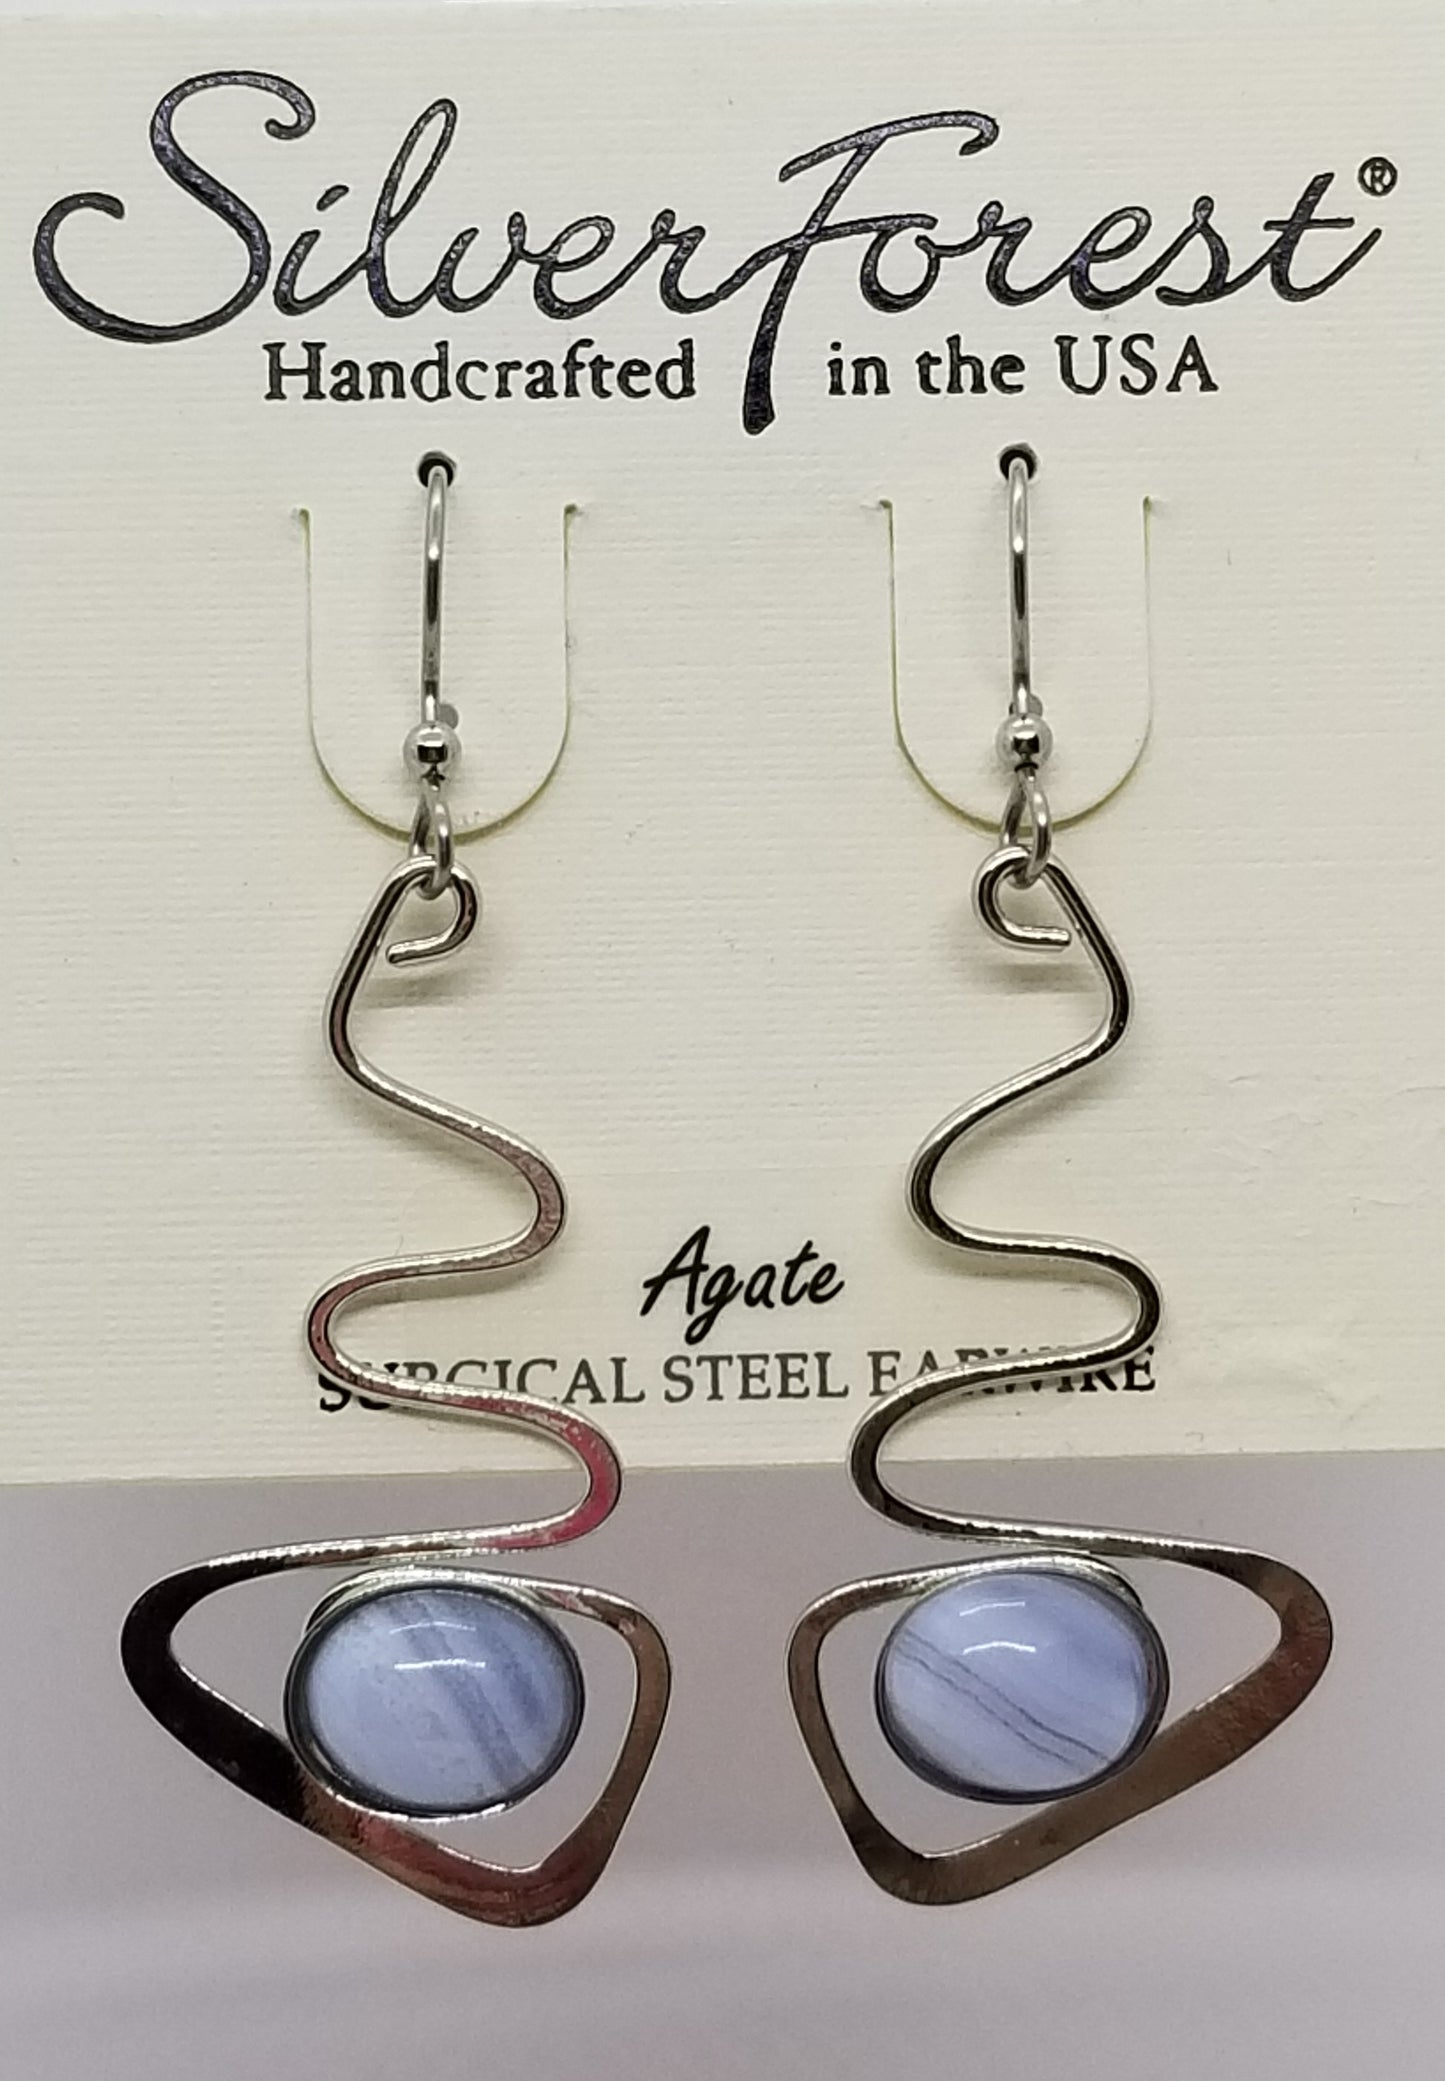 Silver forest surgical steel Agate stone long earrings